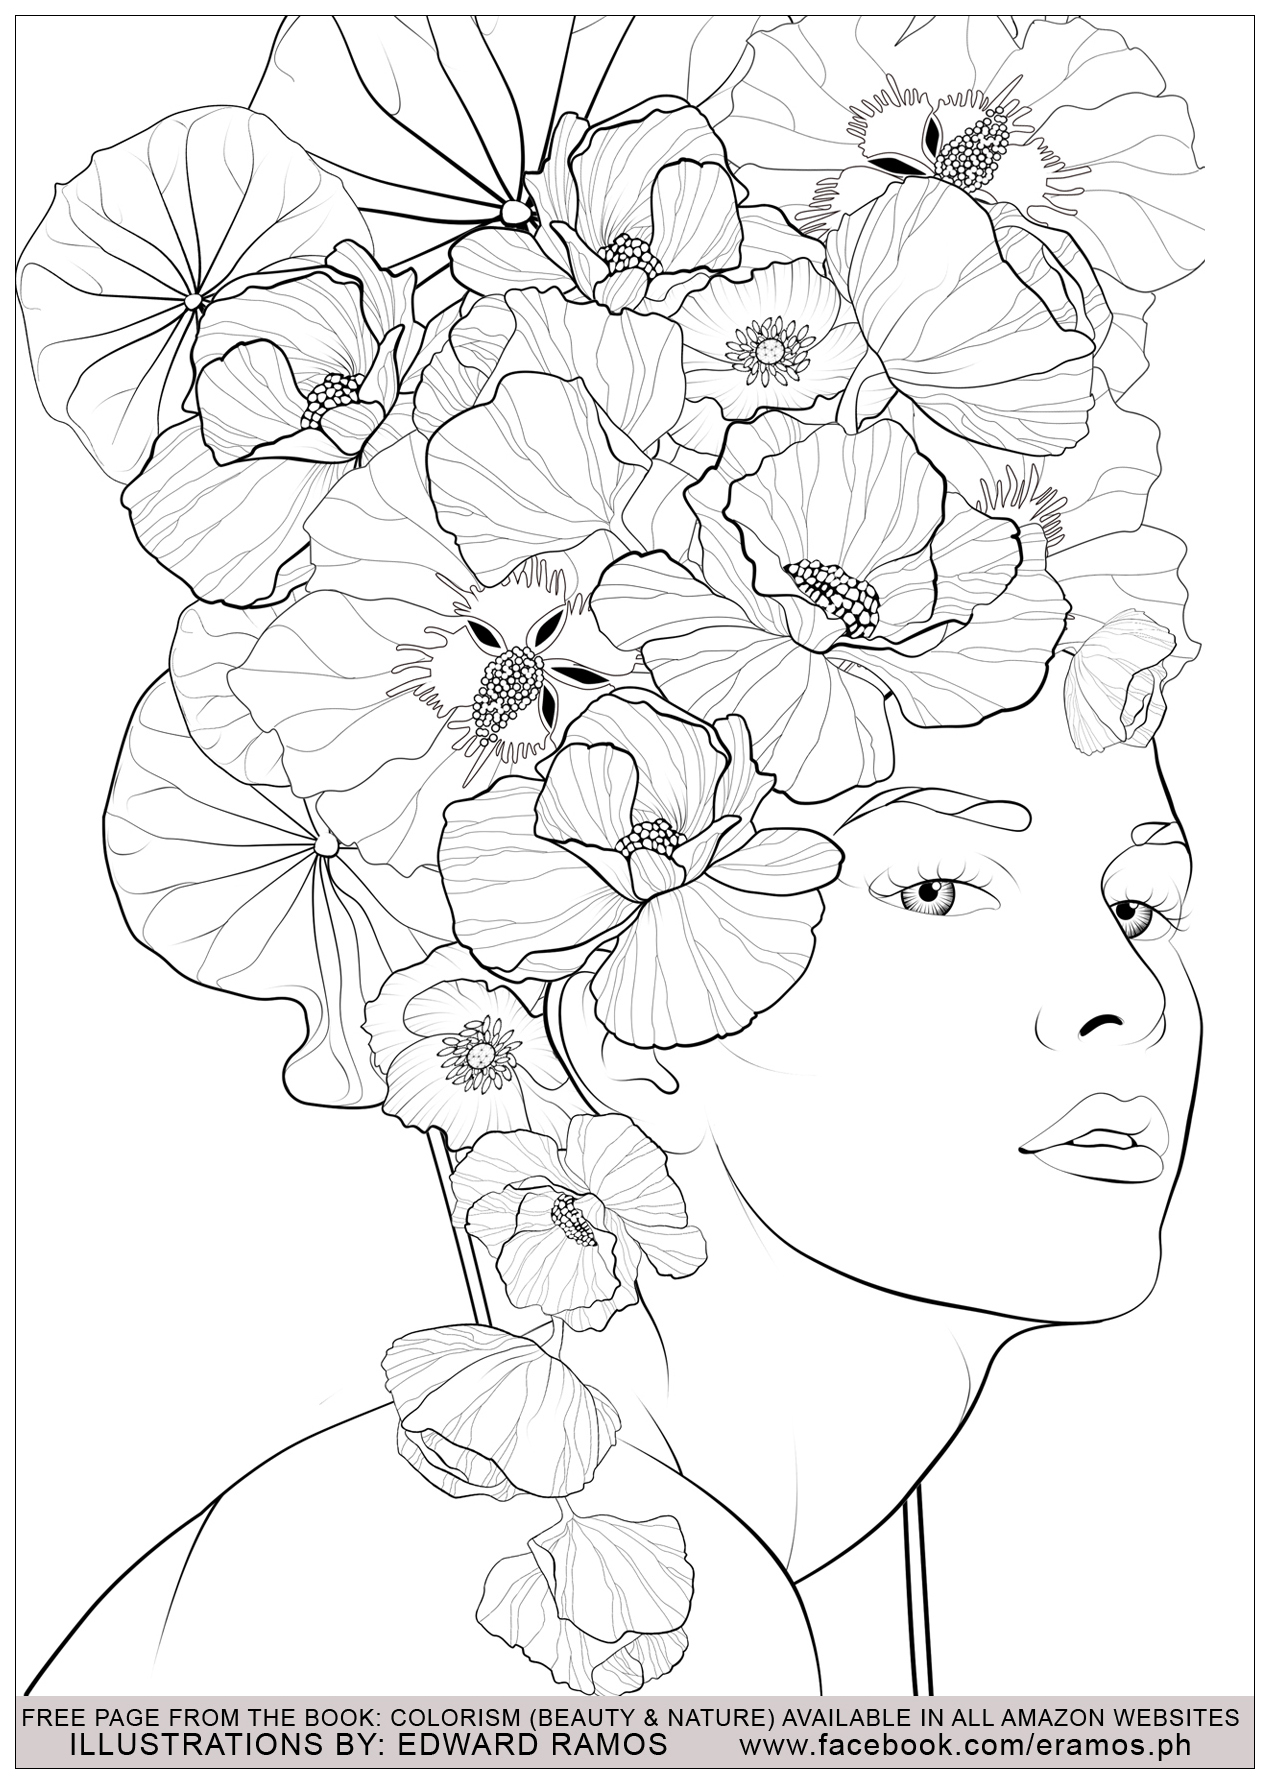 Illustration from the book 'Colorism: Beauty, Artist : Edward Ramos